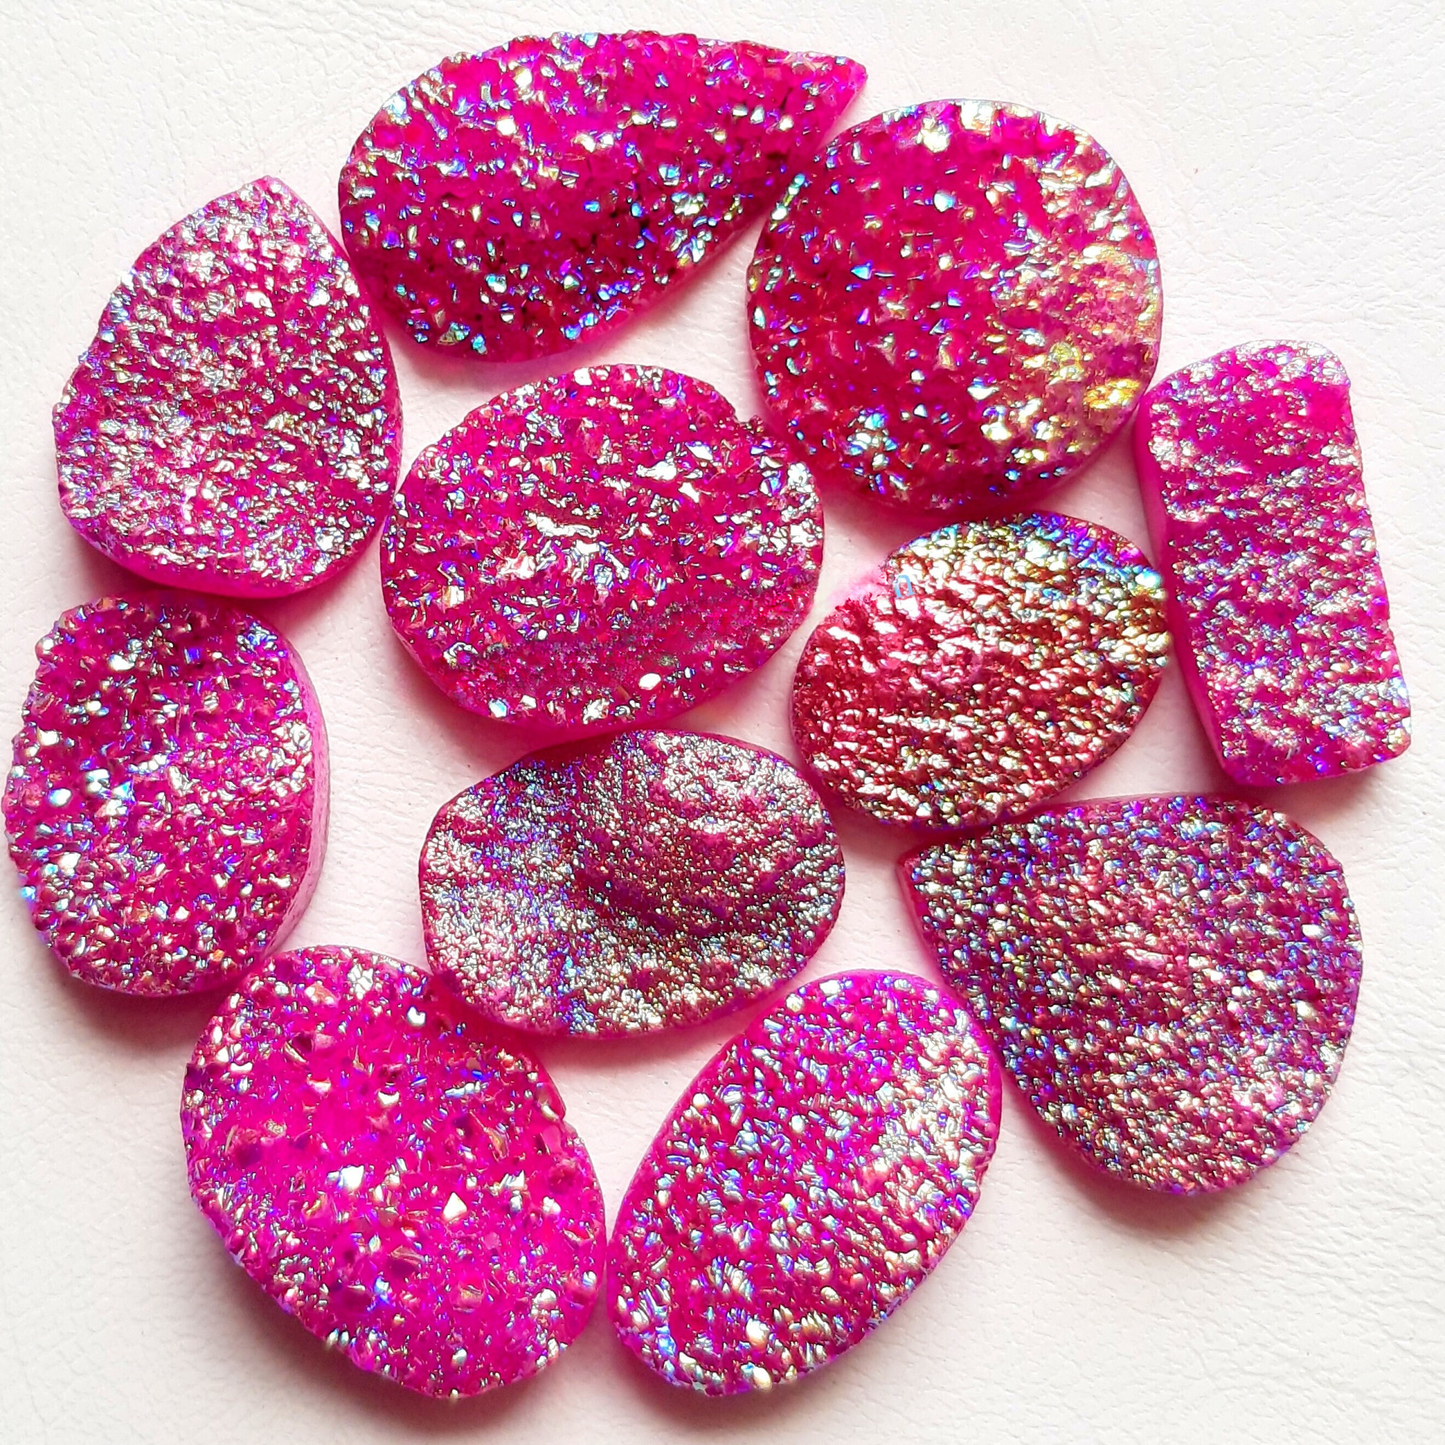 Pink Color Titanium Coated Druzy Stone Cabochon Wholesale Lot Gemstone By Pieces With Different Shapes And Sizes Used For Jewelry Making